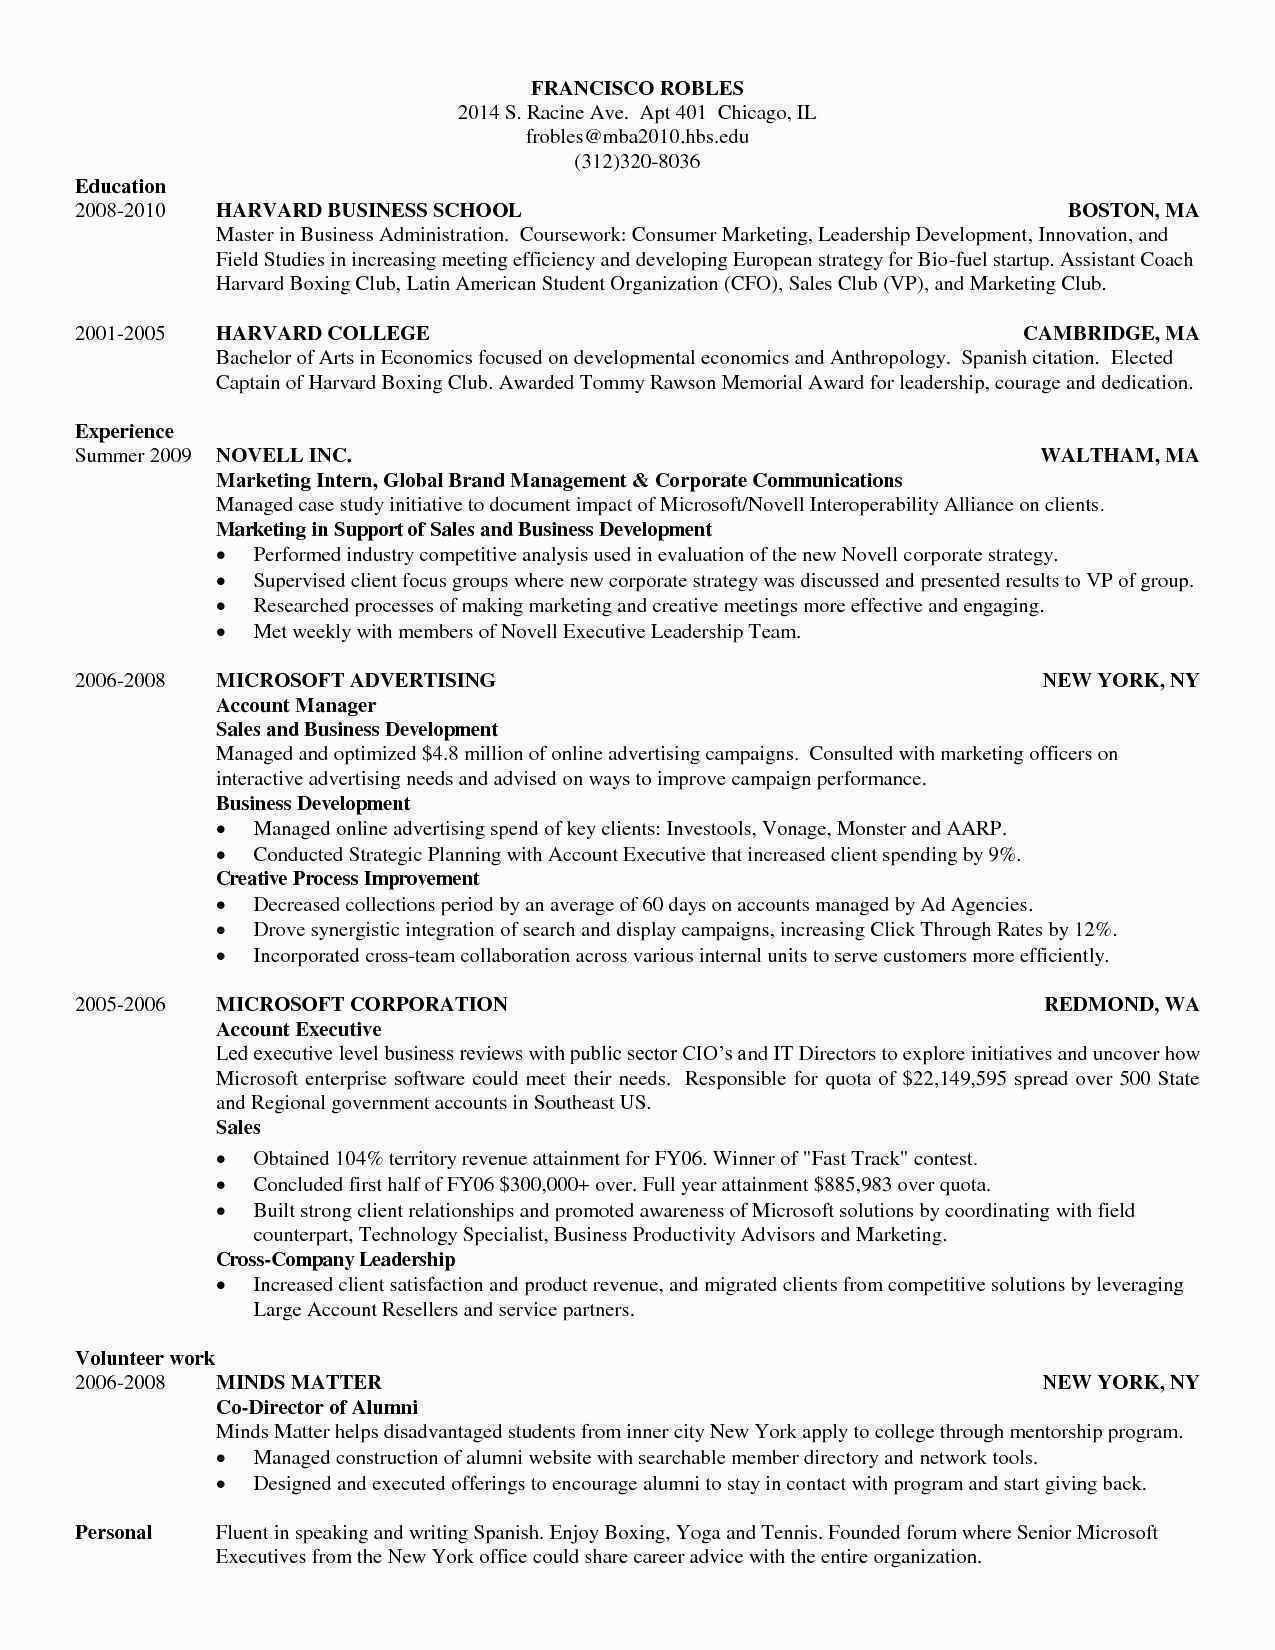 Resume Sample for Business Administration Student Resume format Harvard Business School – Resume format Business …